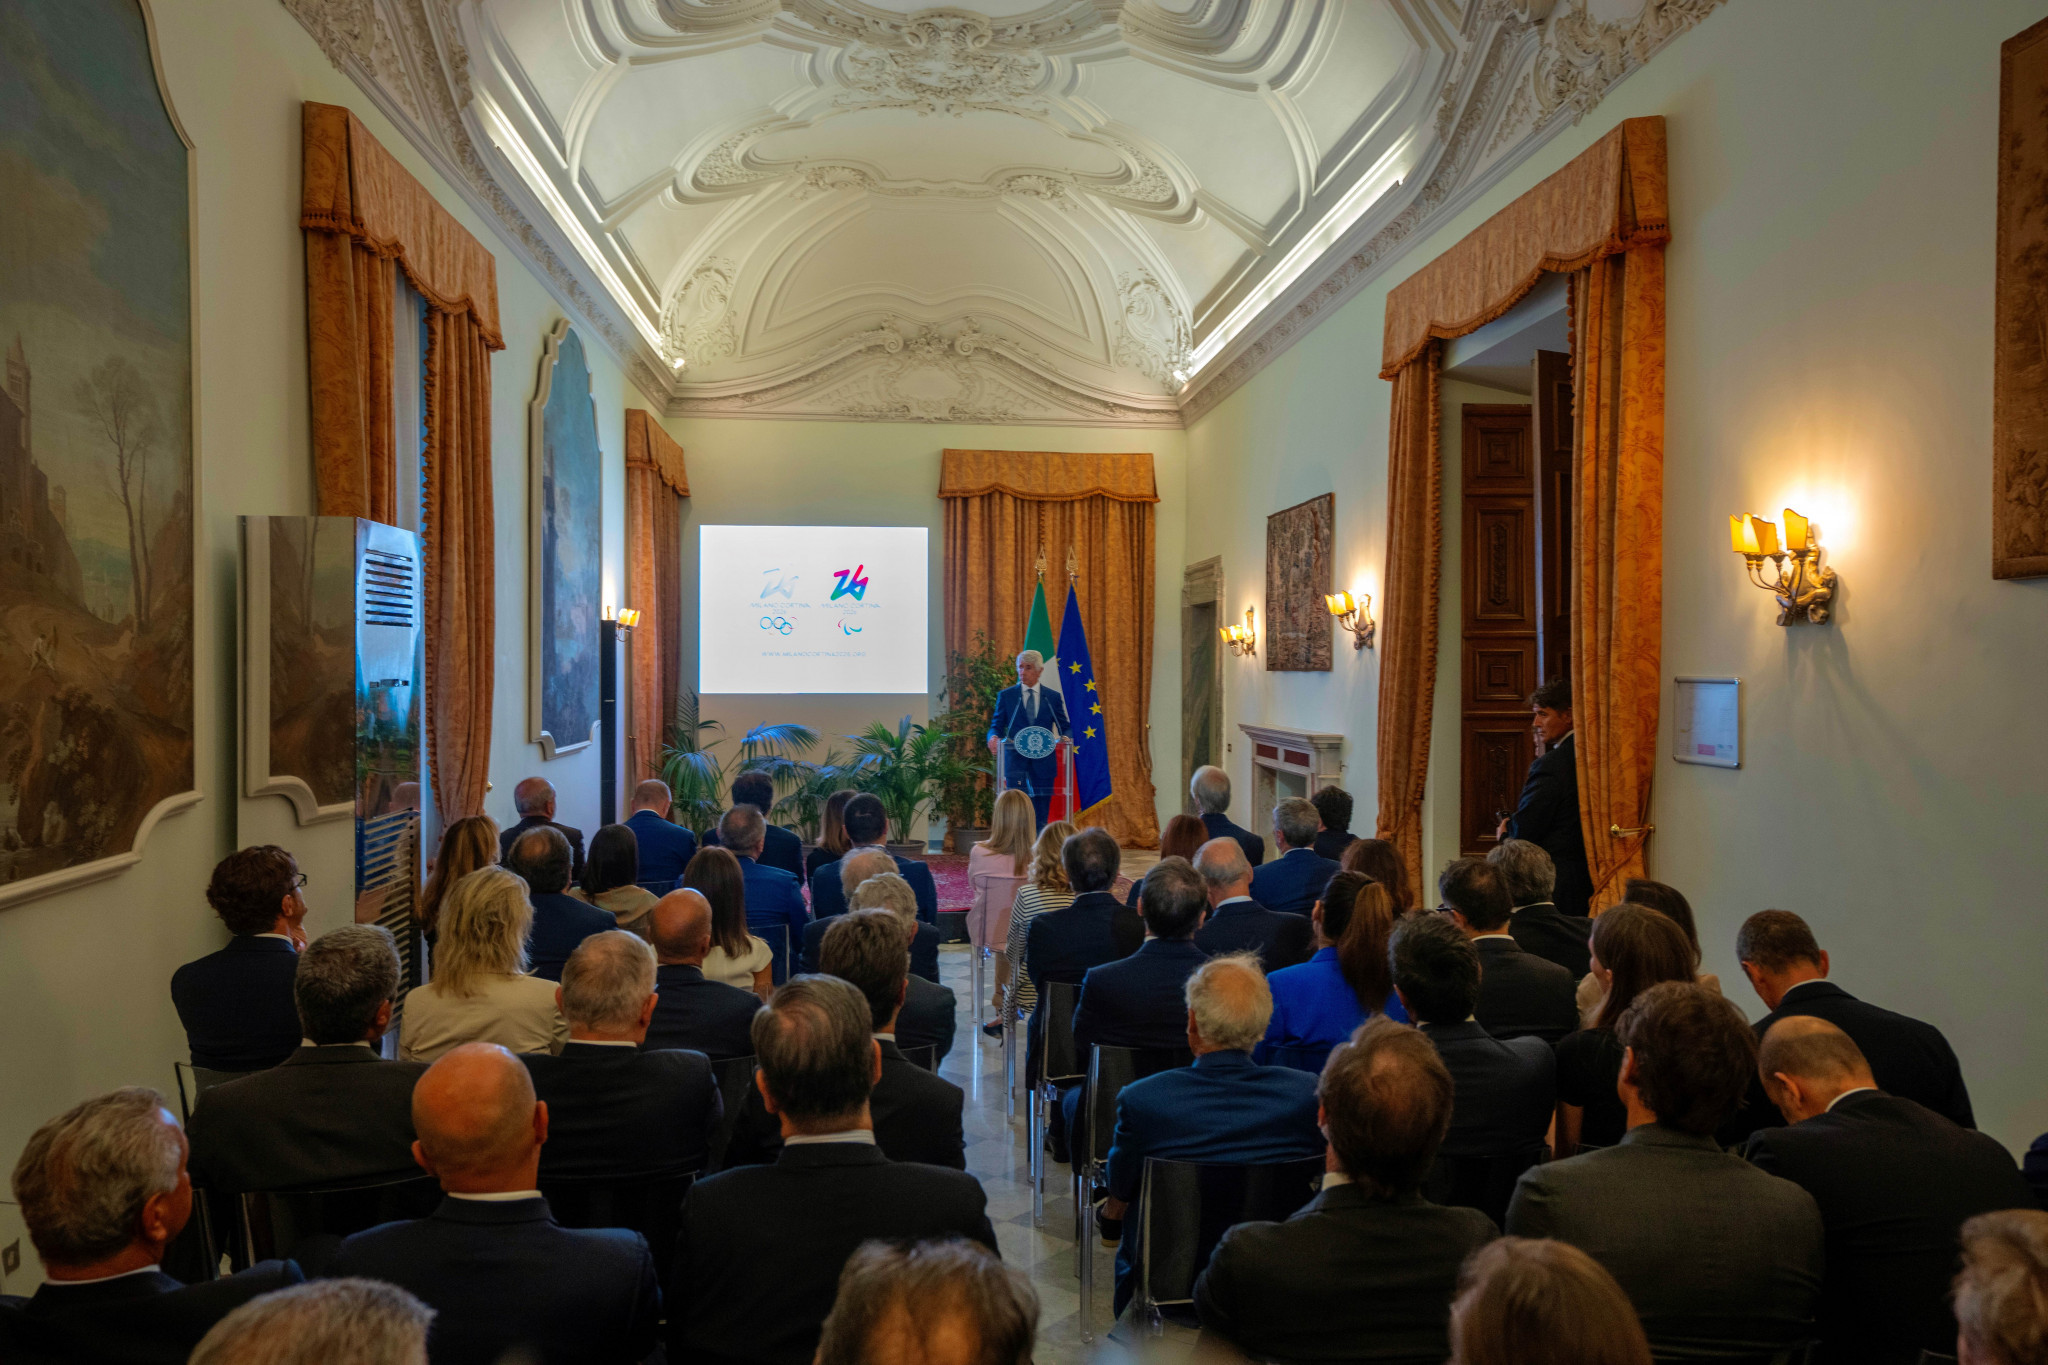 Milan Cortina 2026 stakeholders came together to discuss the Games at the Villa Pamphili in Rome ©Milan Cortina 2026/Filippo Attili